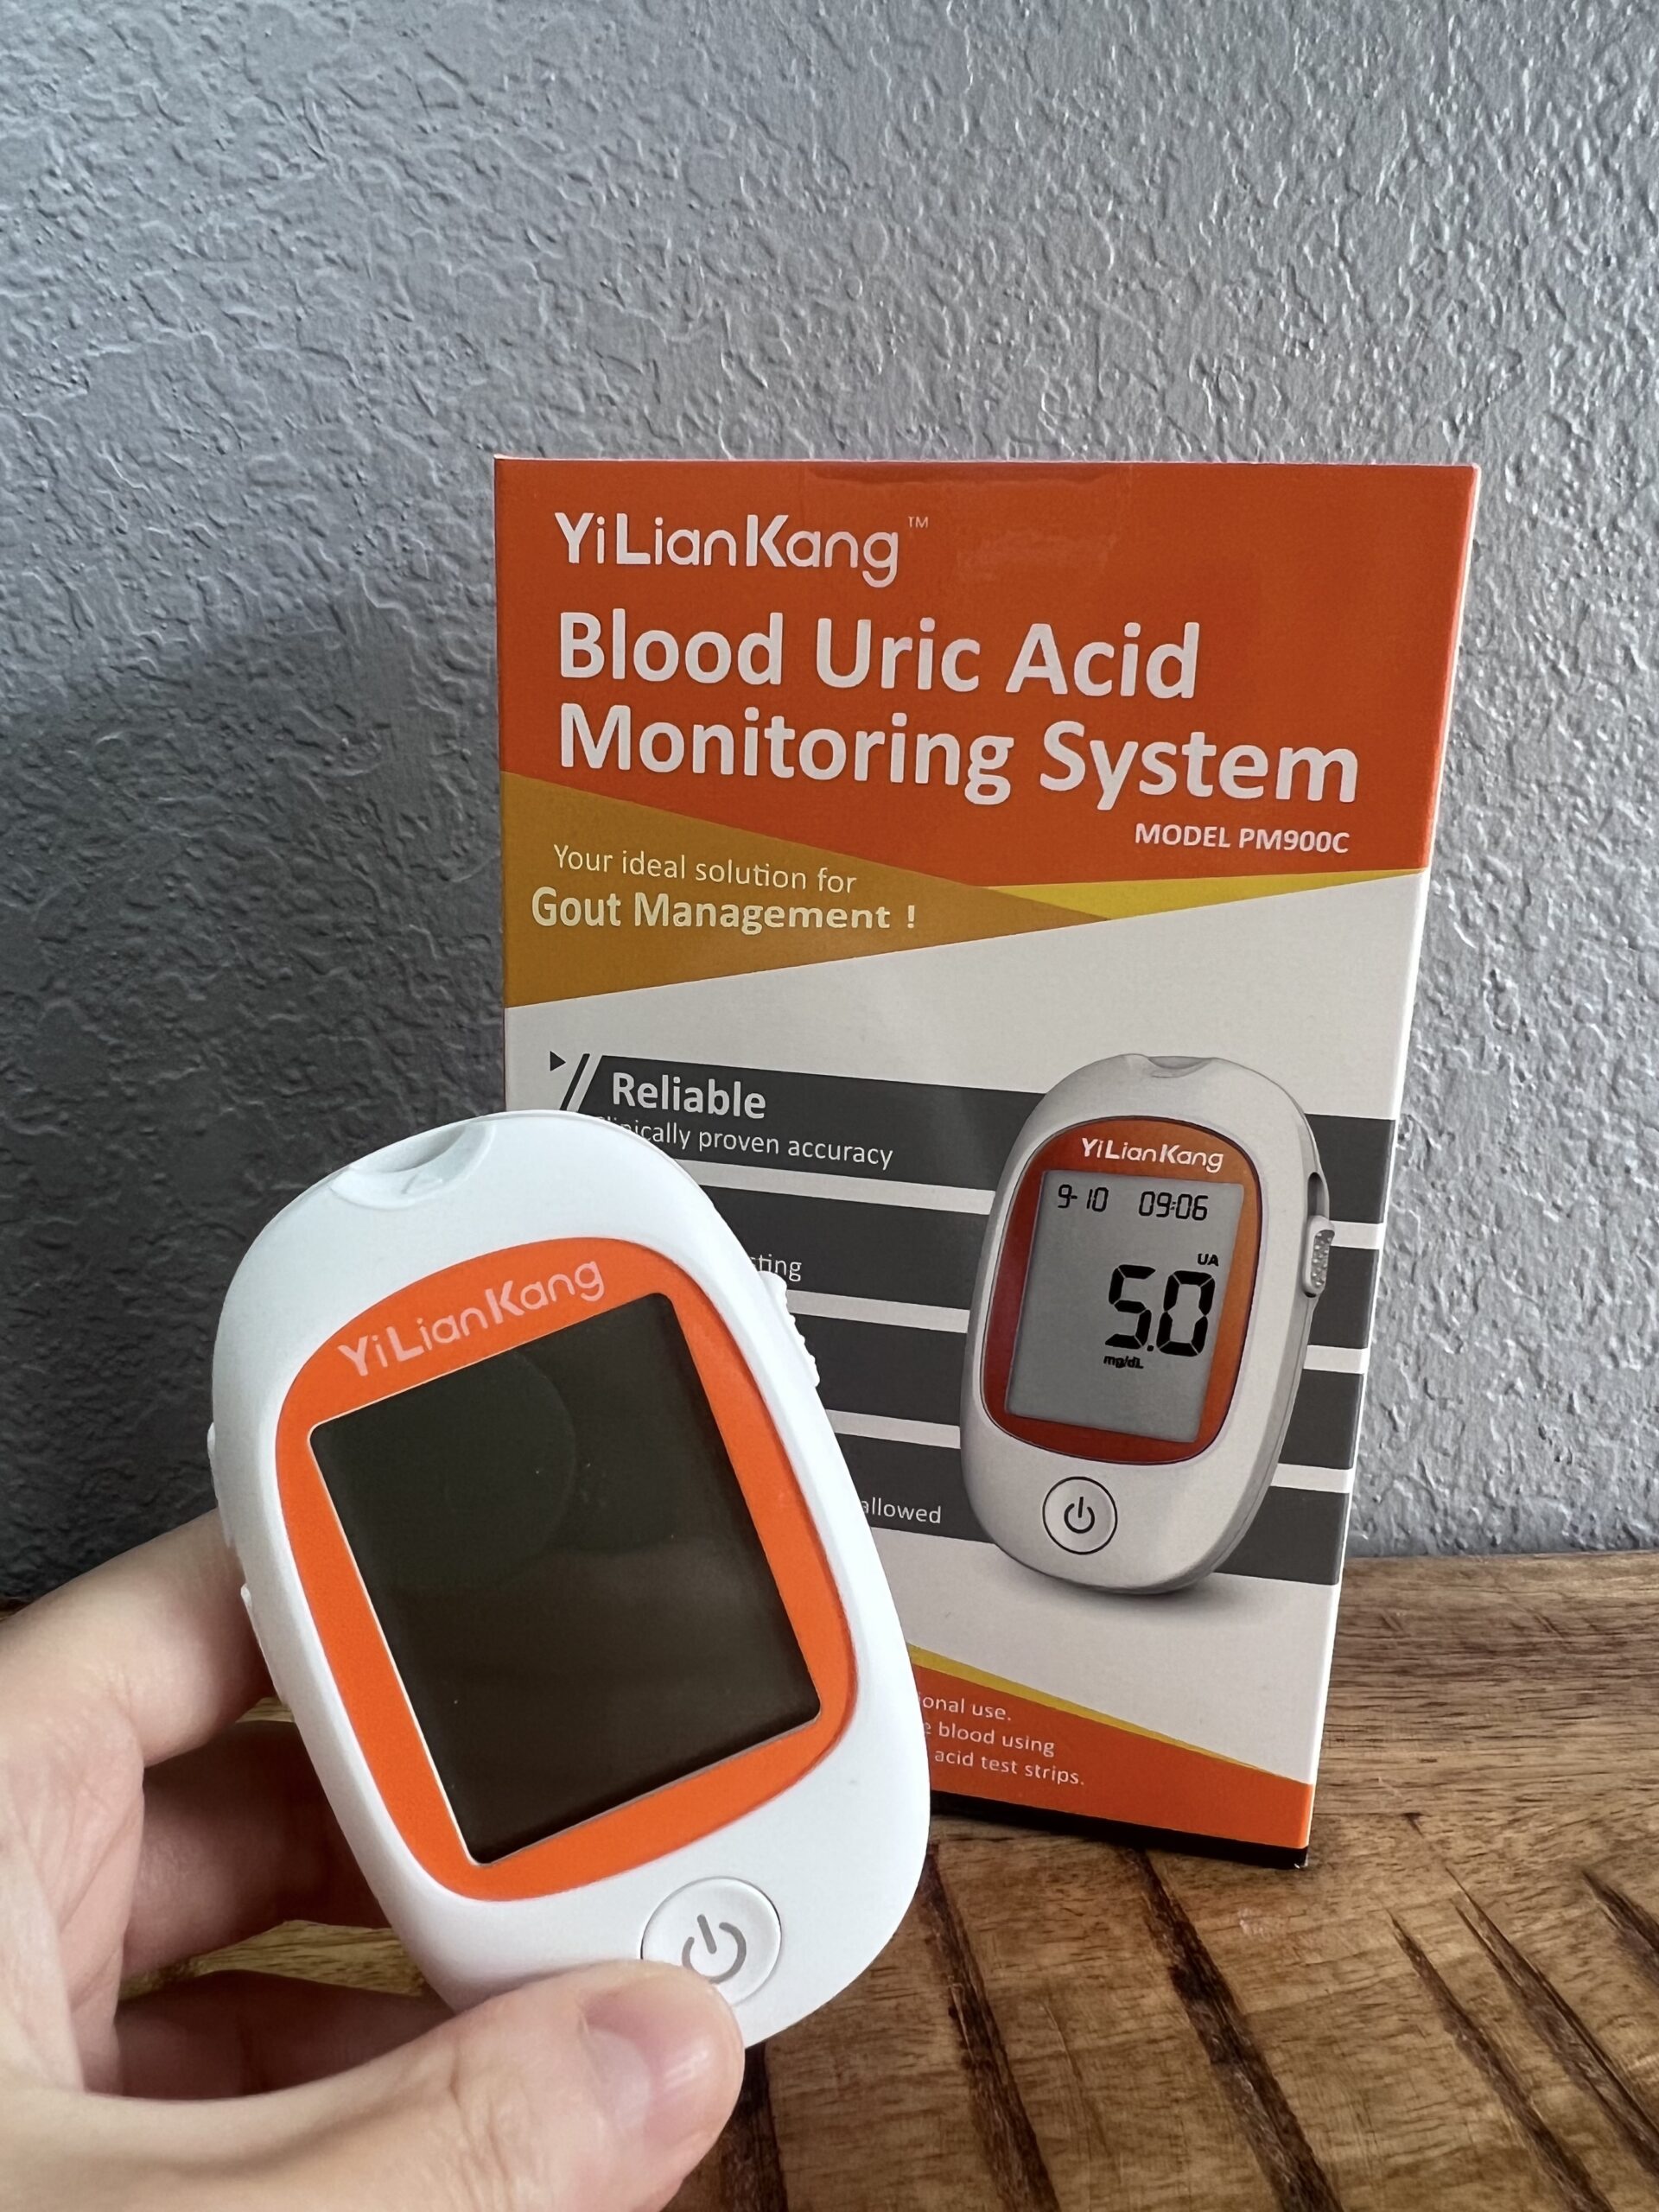 My Experience Testing My Uric Acid at Home